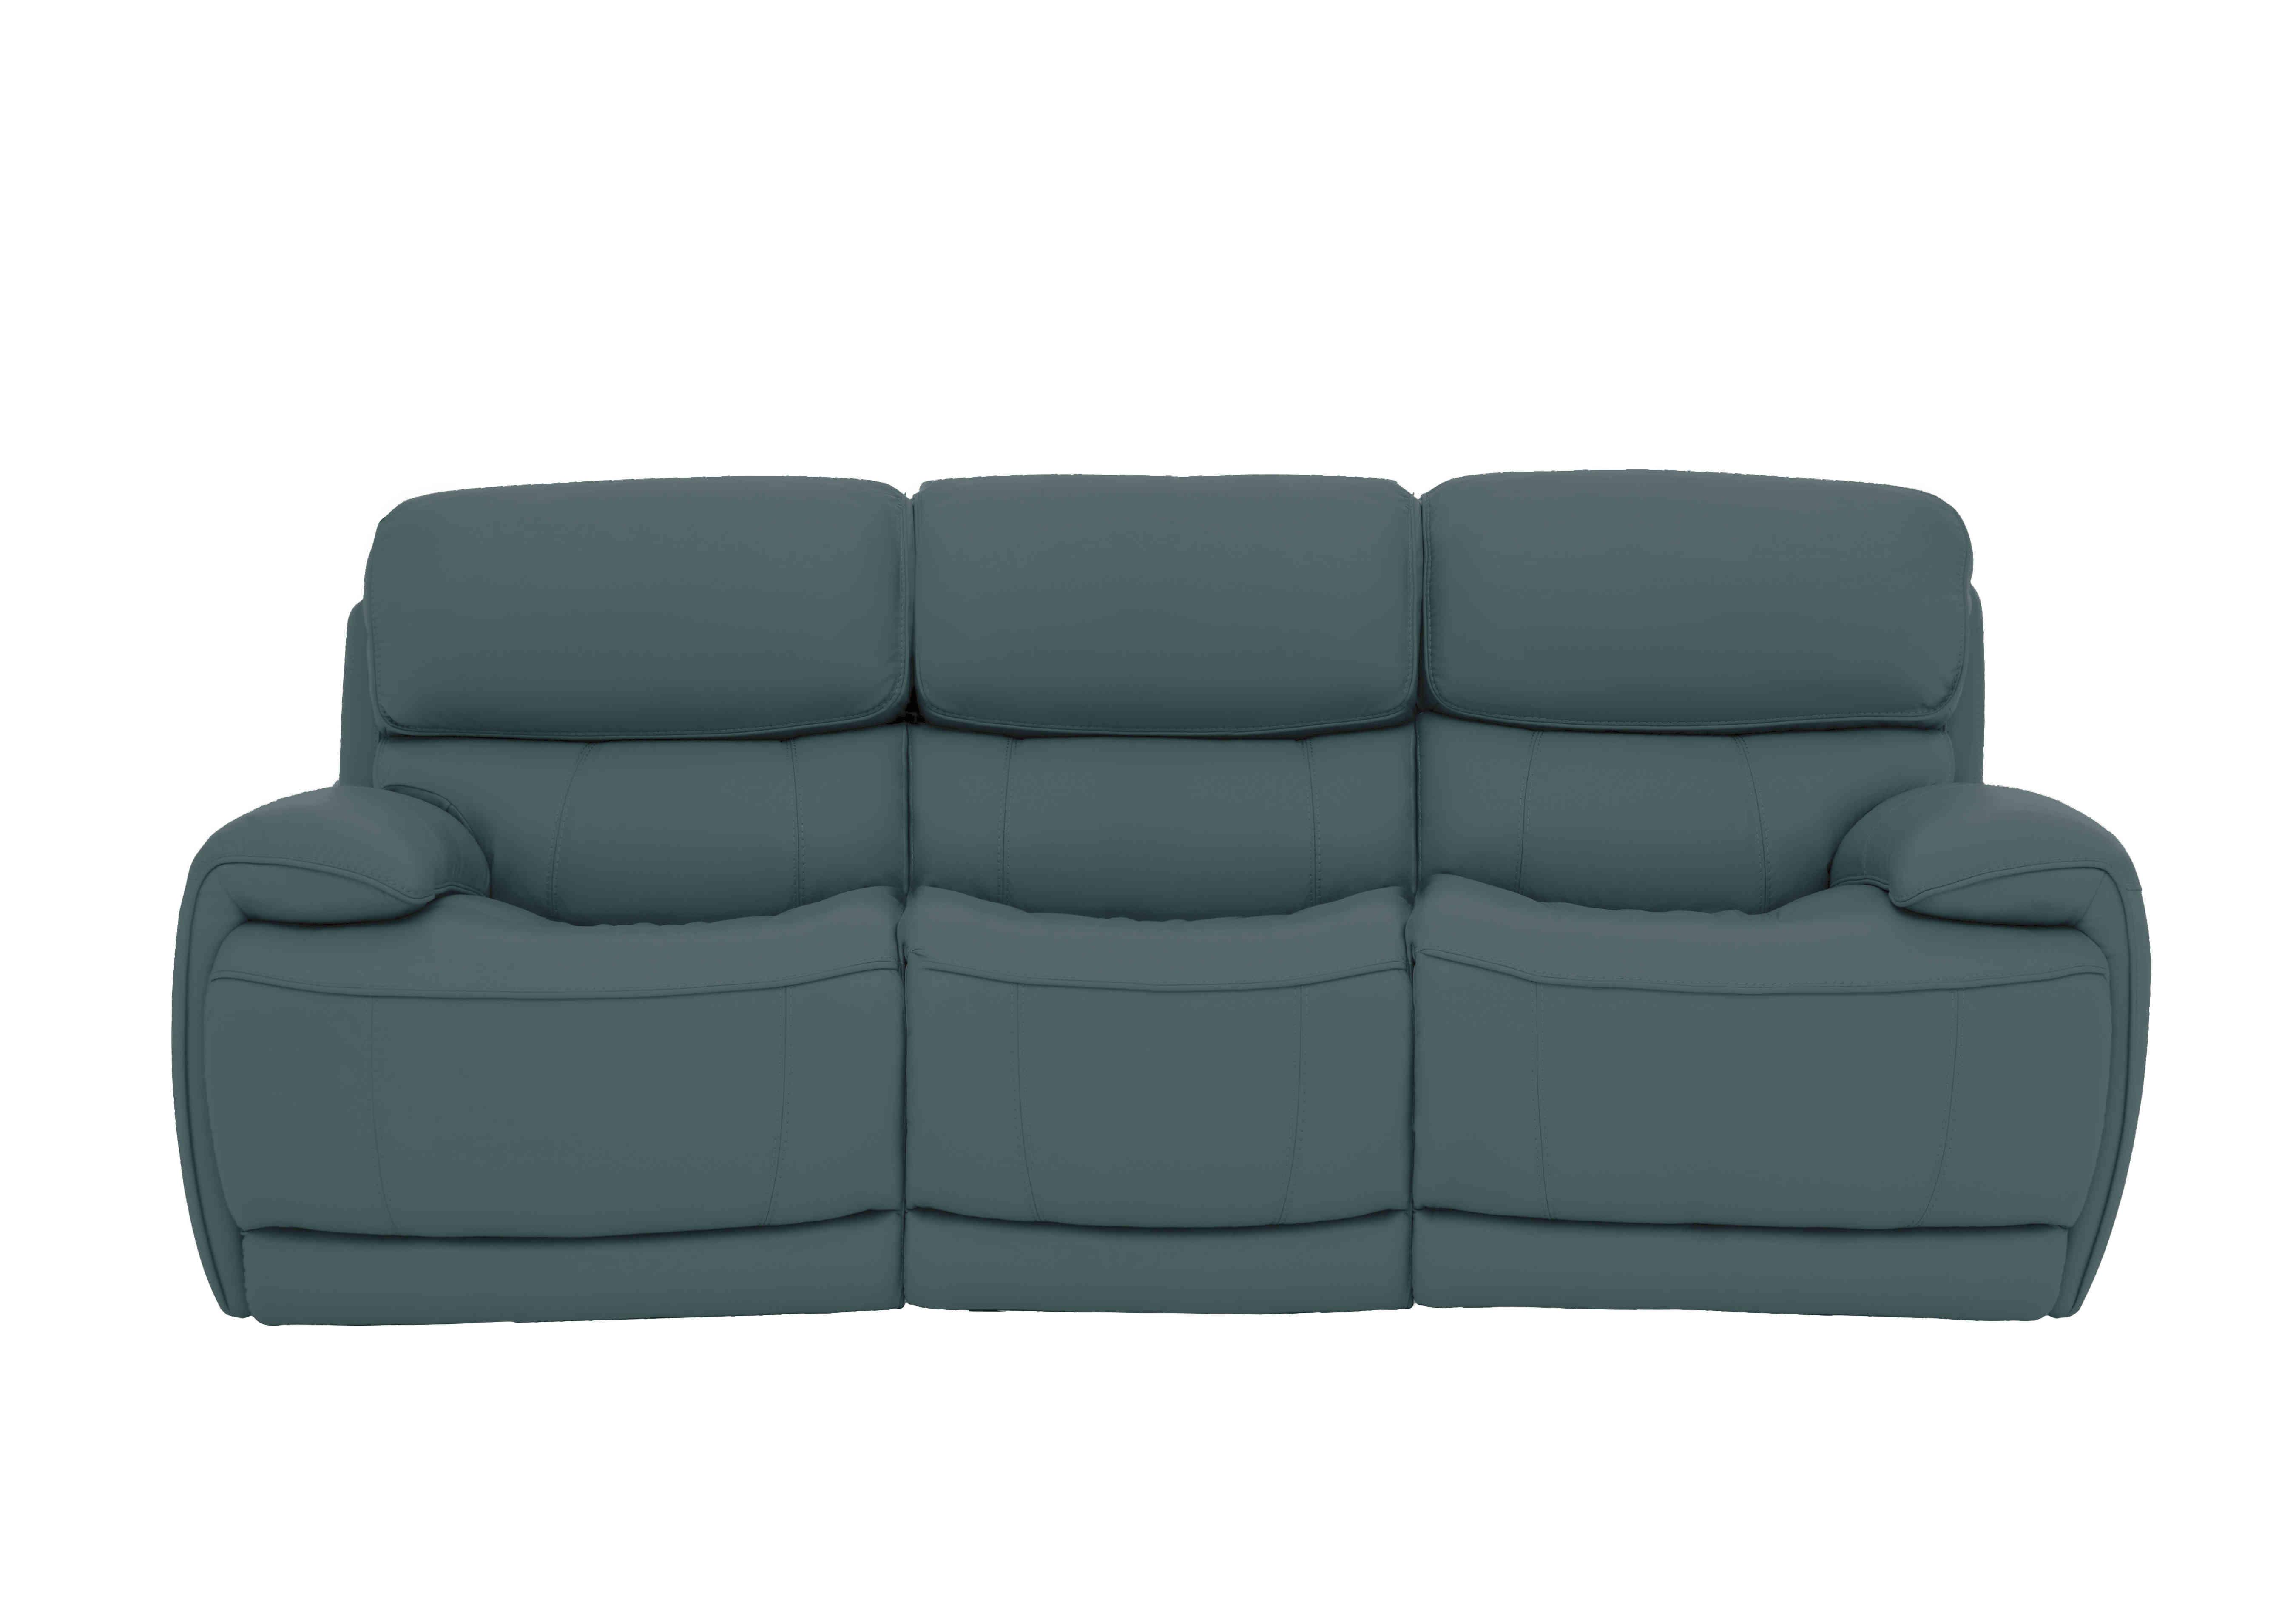 Rocco 3 Seater Leather Power Rocker Sofa with Power Headrests in Bv-301e Lake Green on Furniture Village